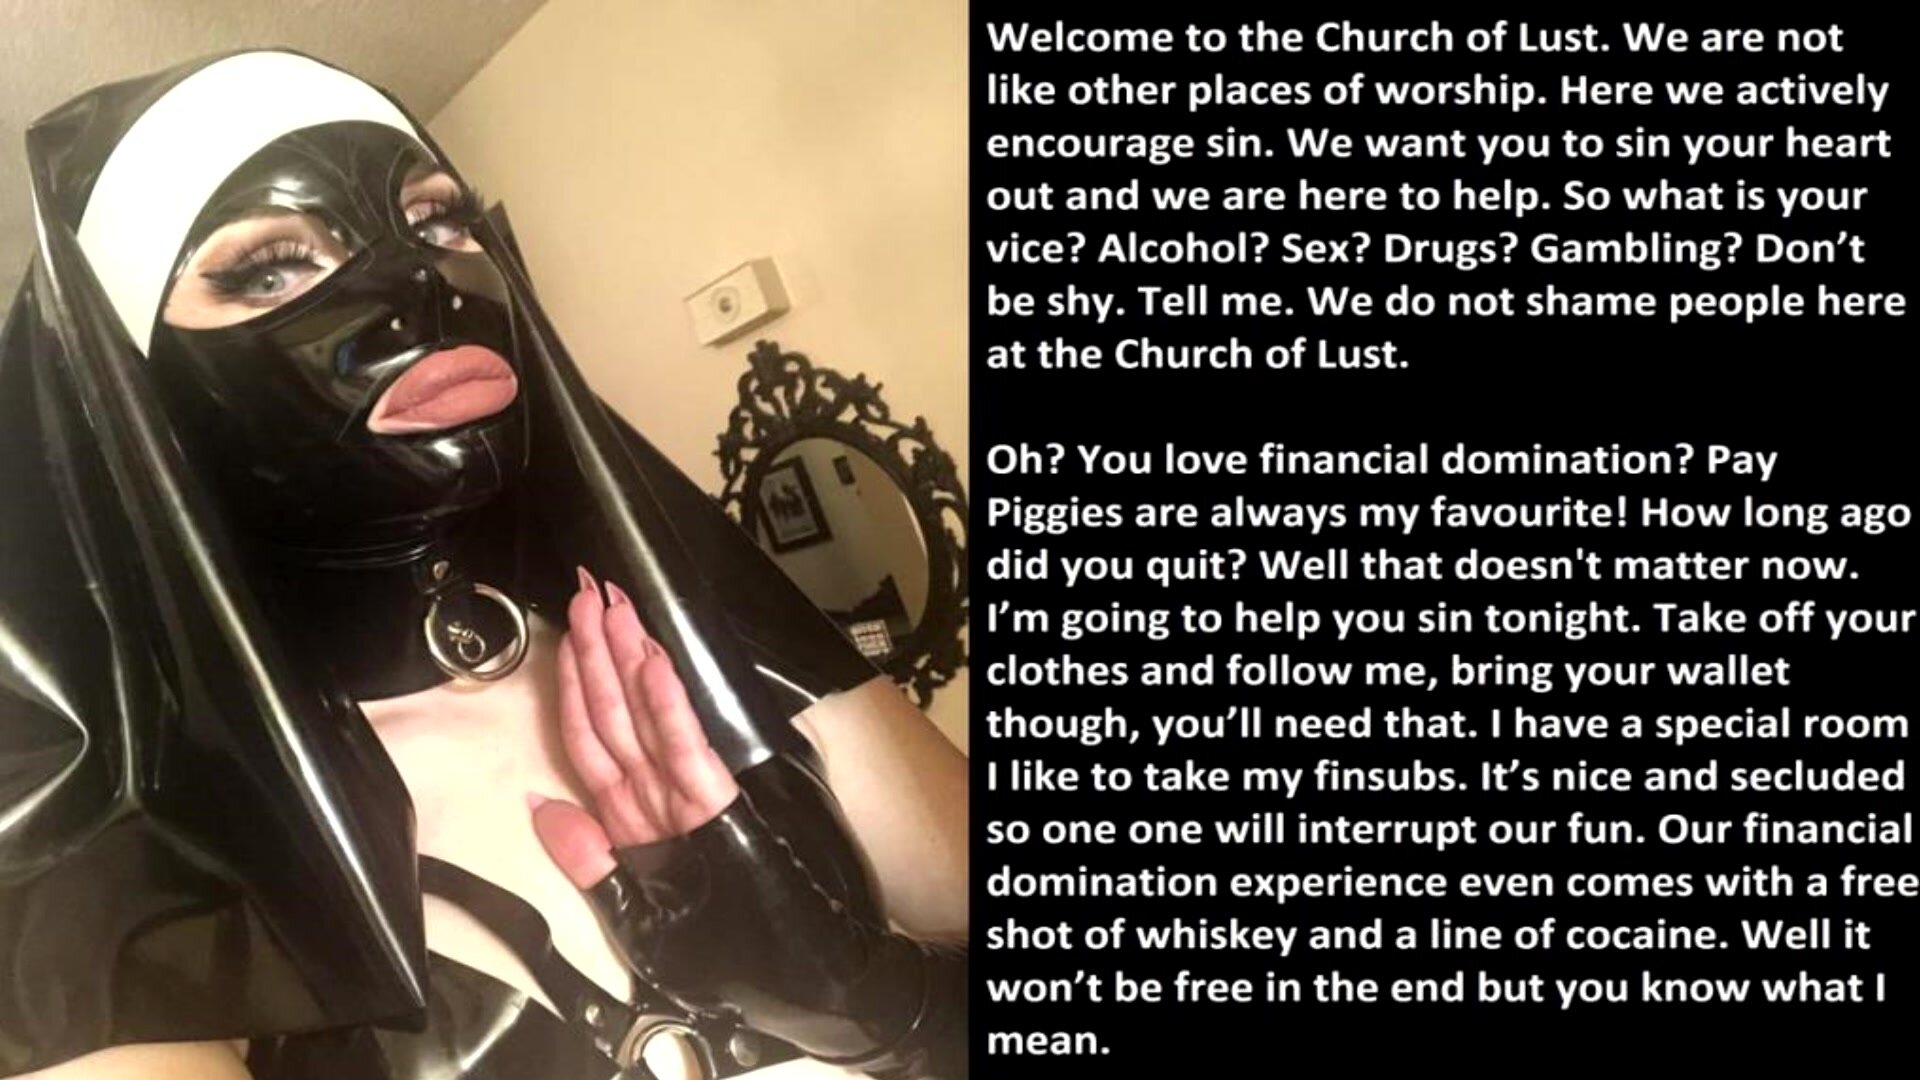 The Church of Lust.